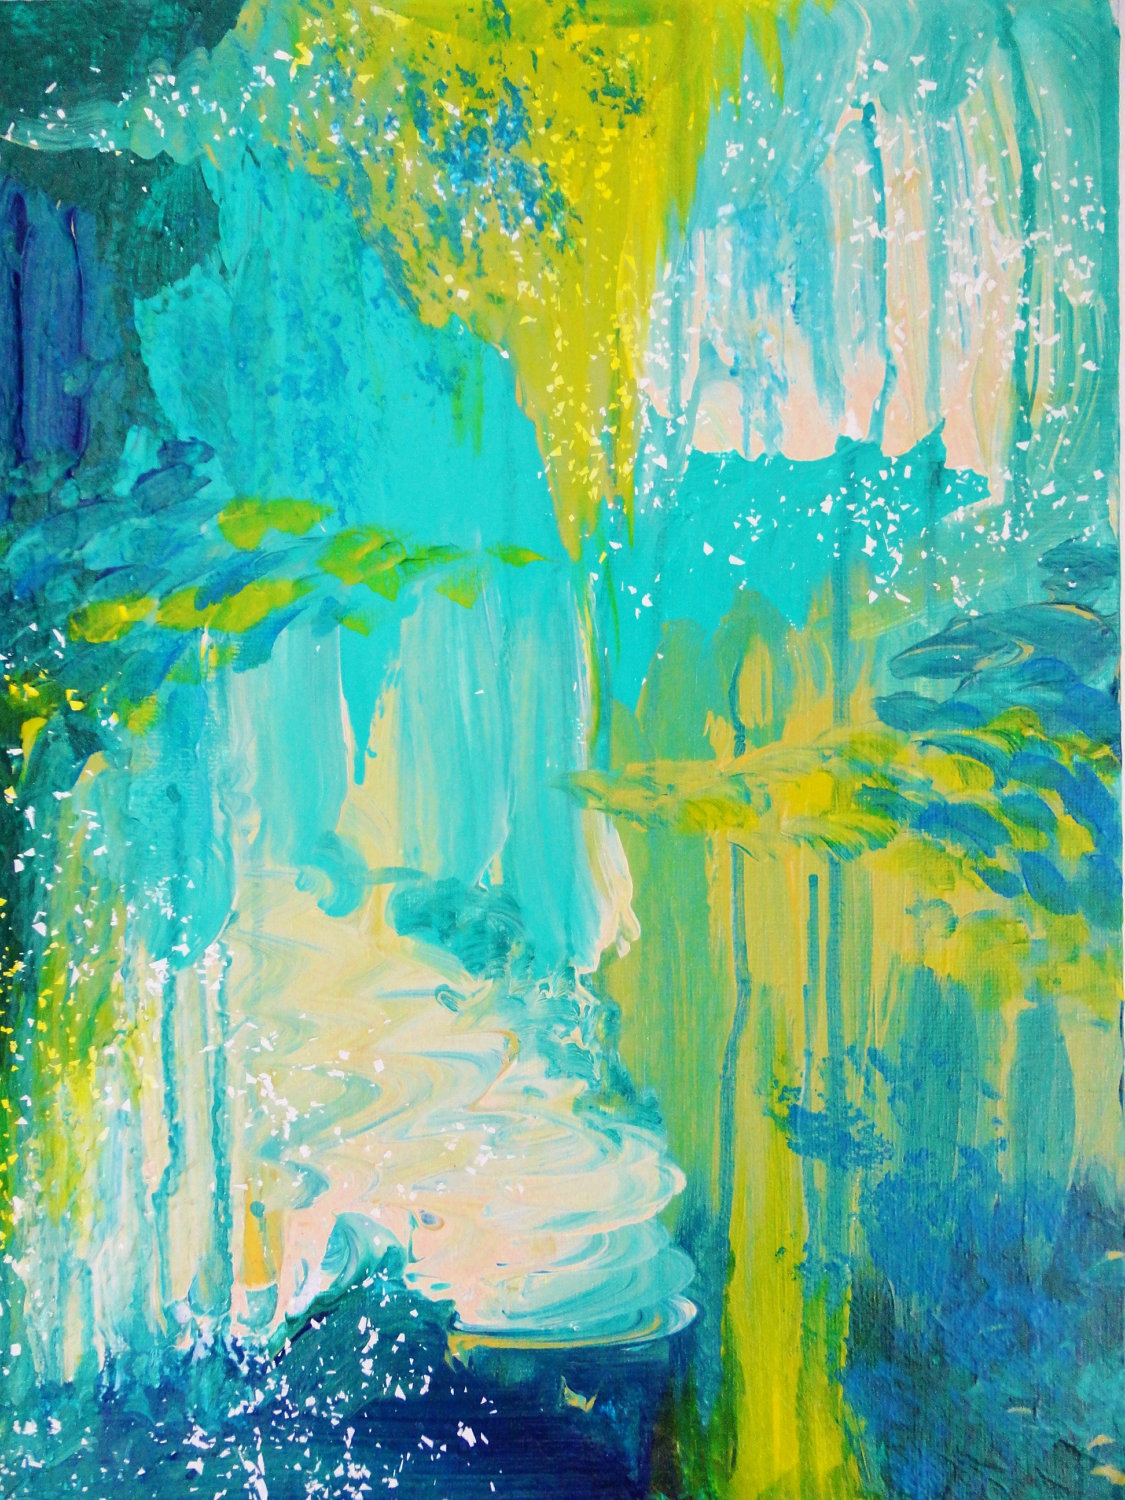 - Amazing Abstract Acrylic Seaside Dreams Painting Beach Ocean Waves Xmas Gift Teal Navy Citrine Chartreuse Turquoise